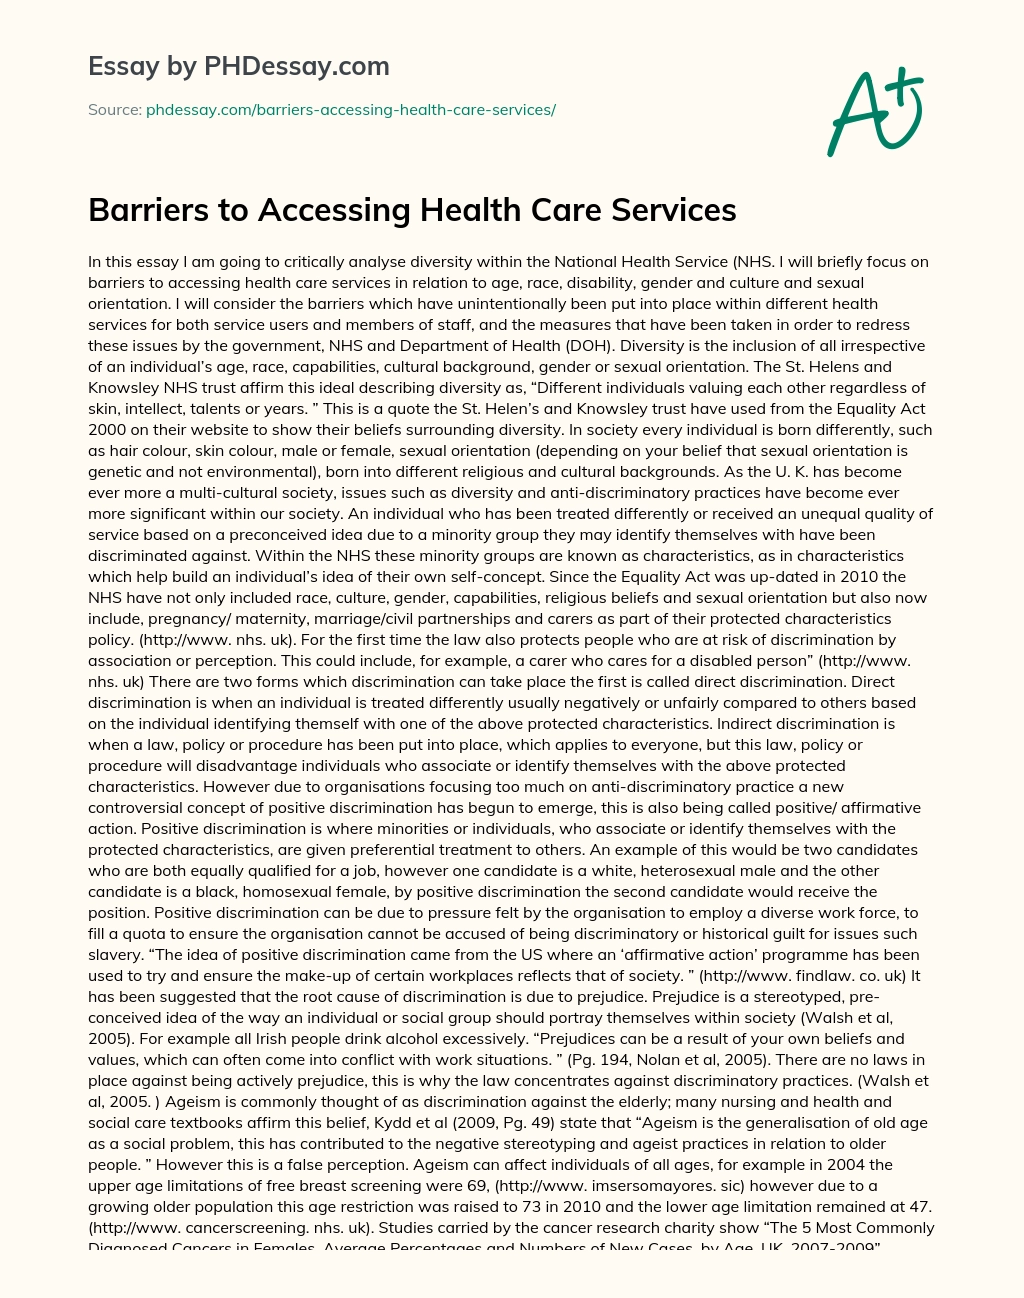 Barriers to Accessing Health Care Services essay